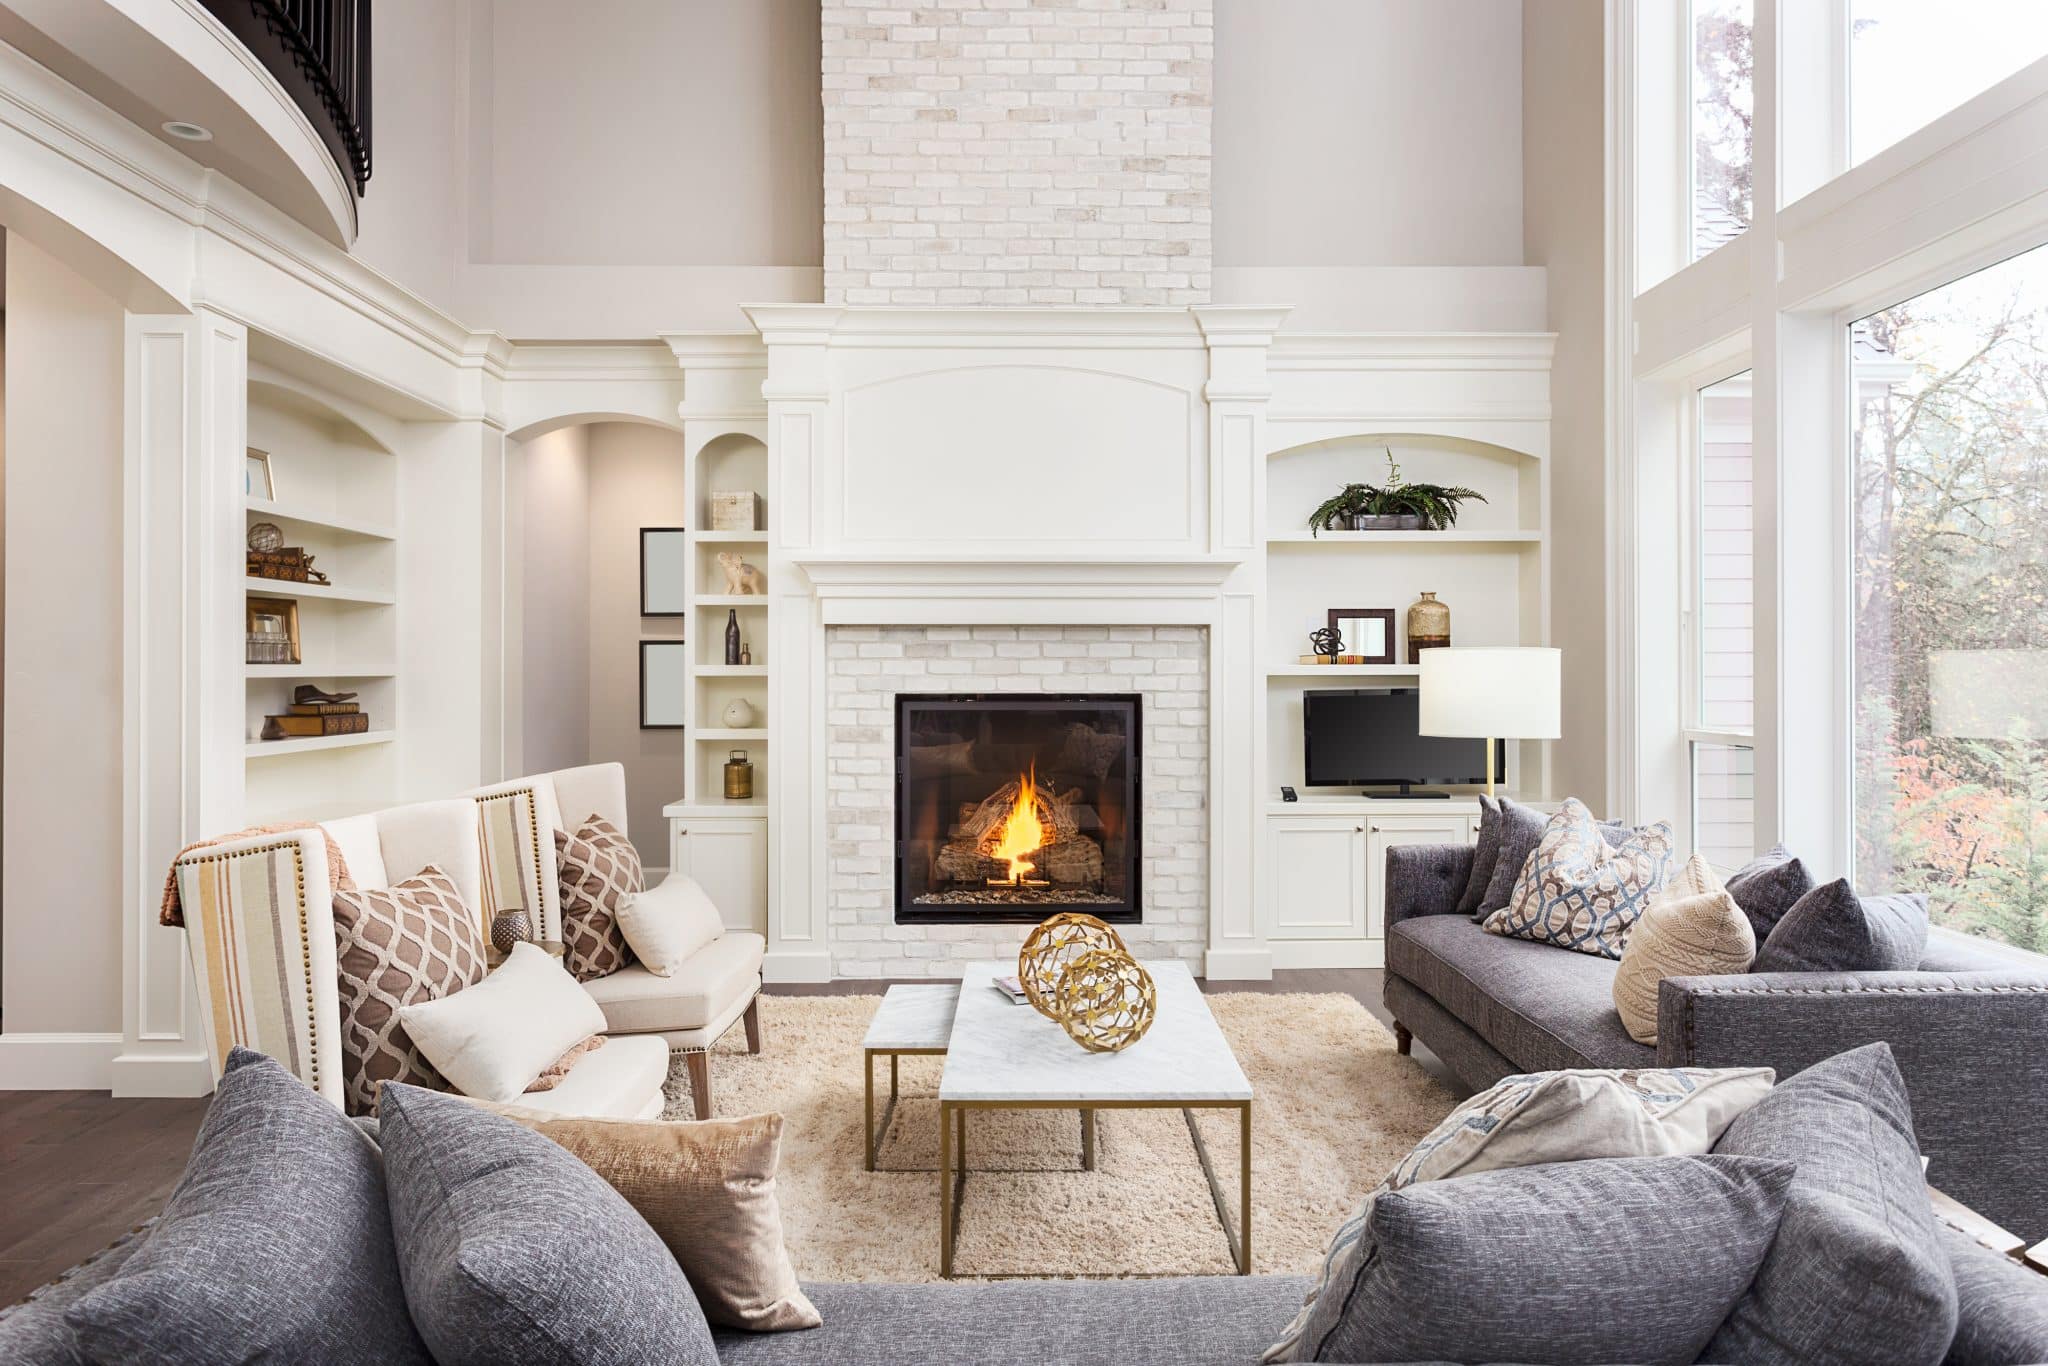 Living room in new construction luxury home following interior design guidelines